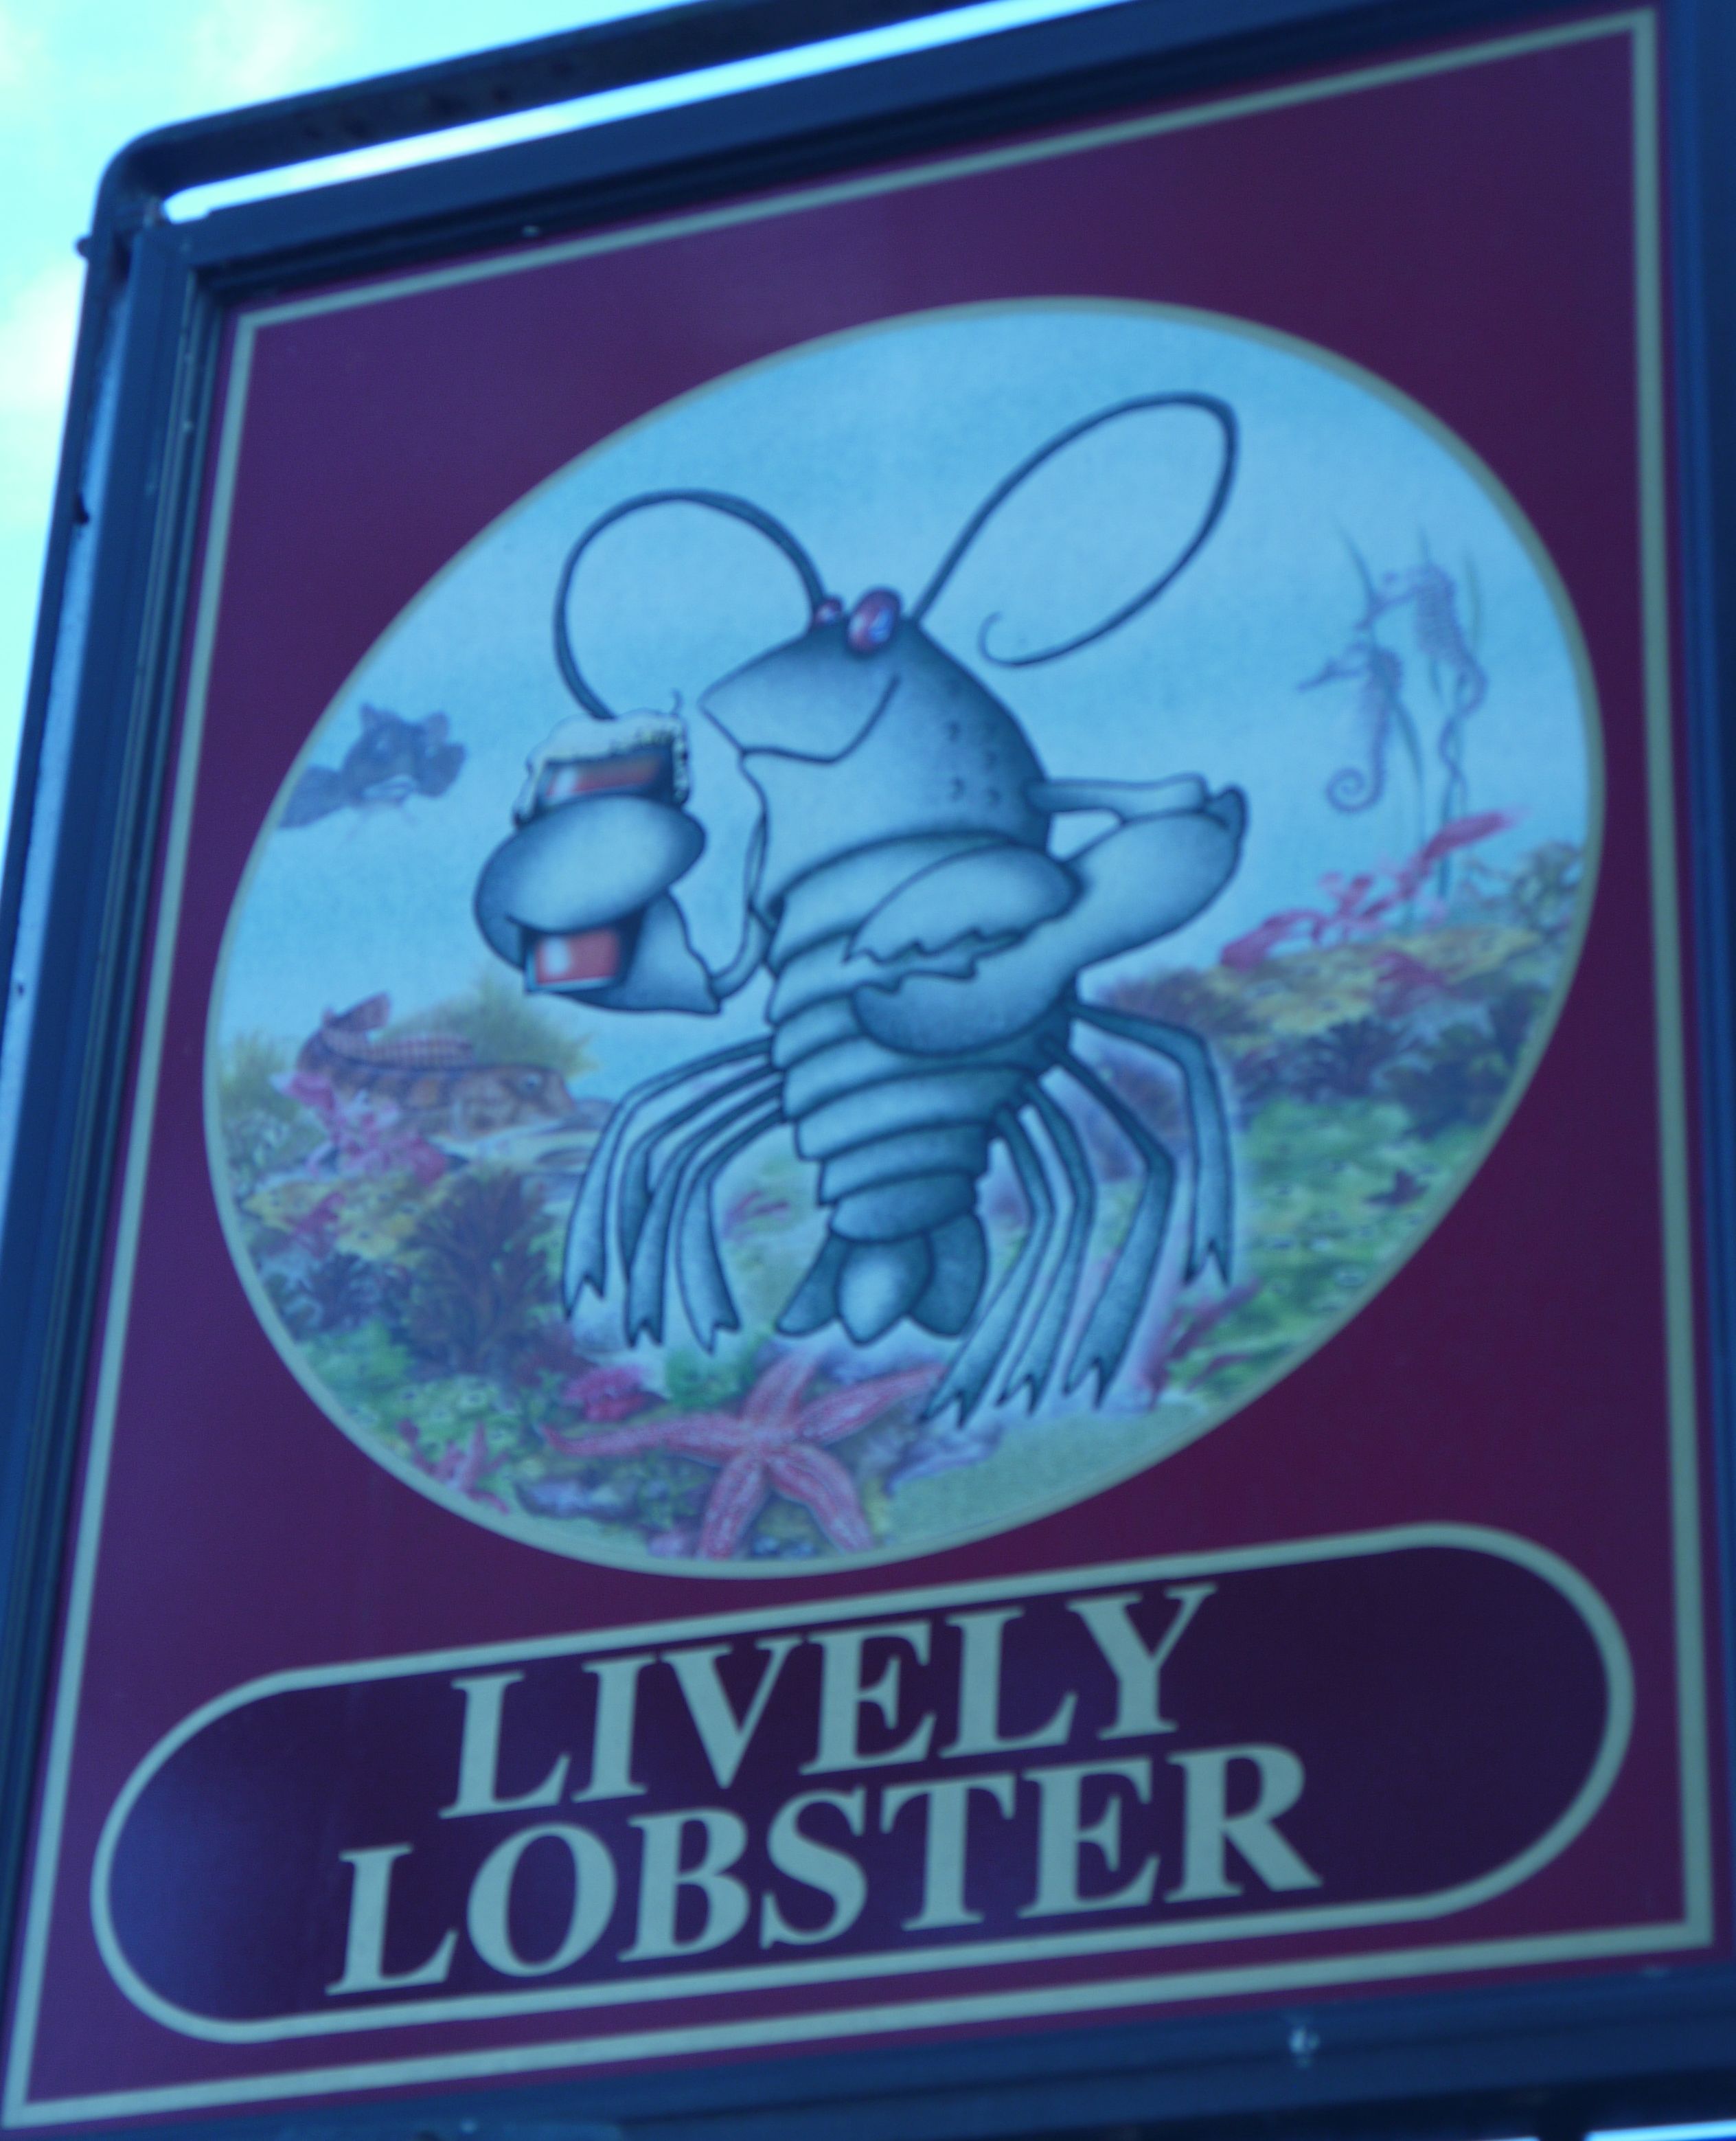 Photo taken by me – The Lively Lobster Pub Sign, Sale, Manchester 